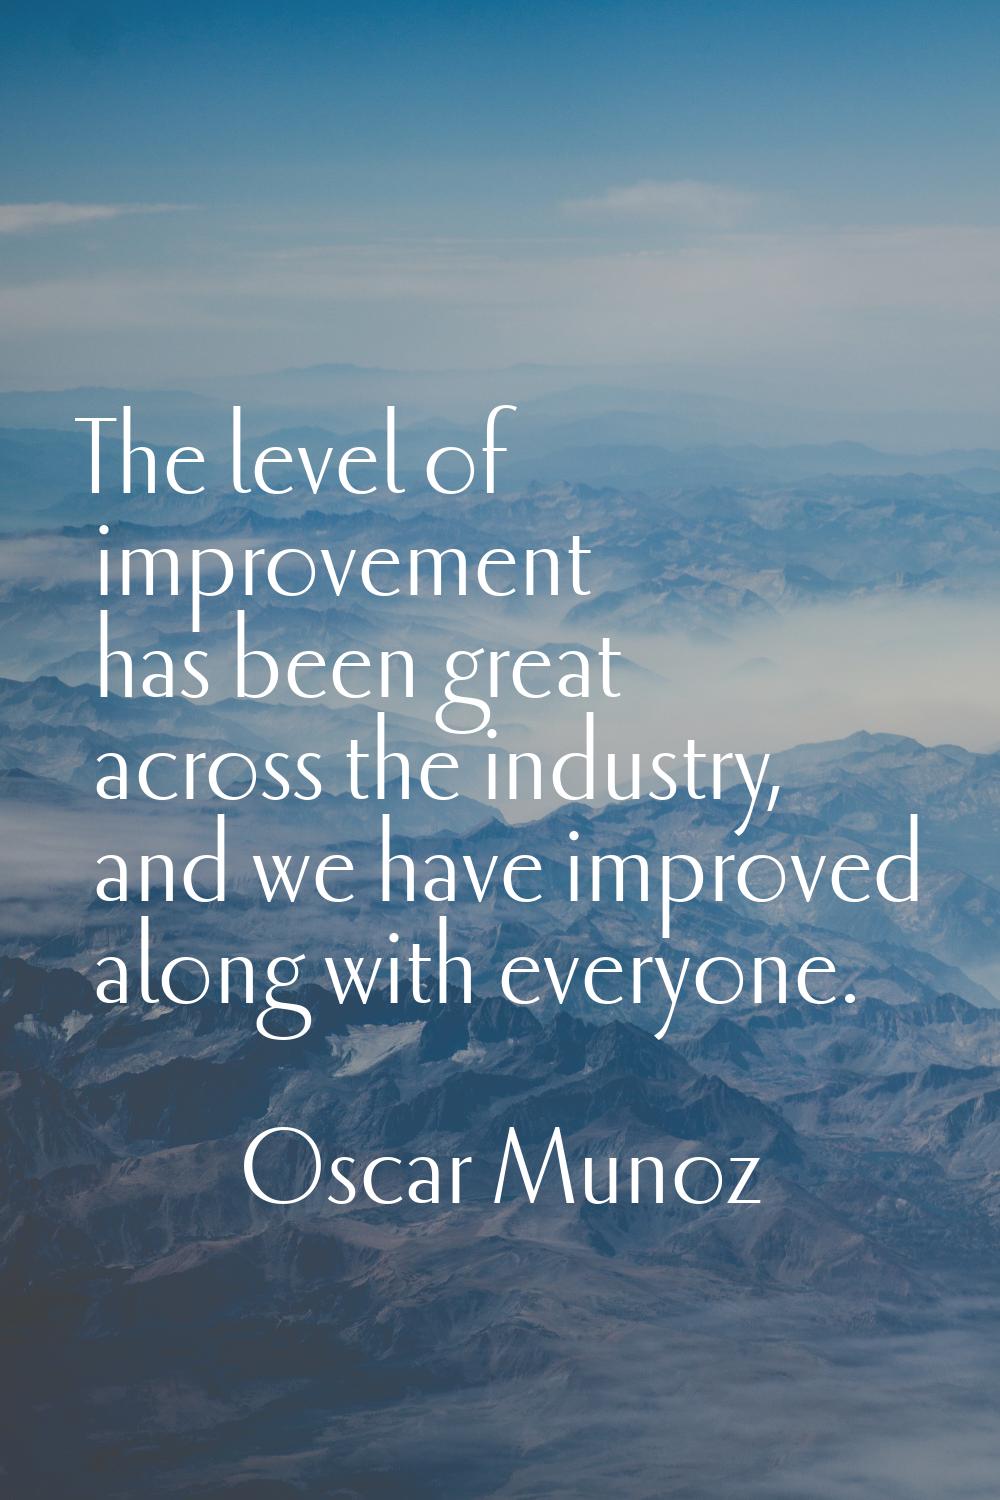 The level of improvement has been great across the industry, and we have improved along with everyo